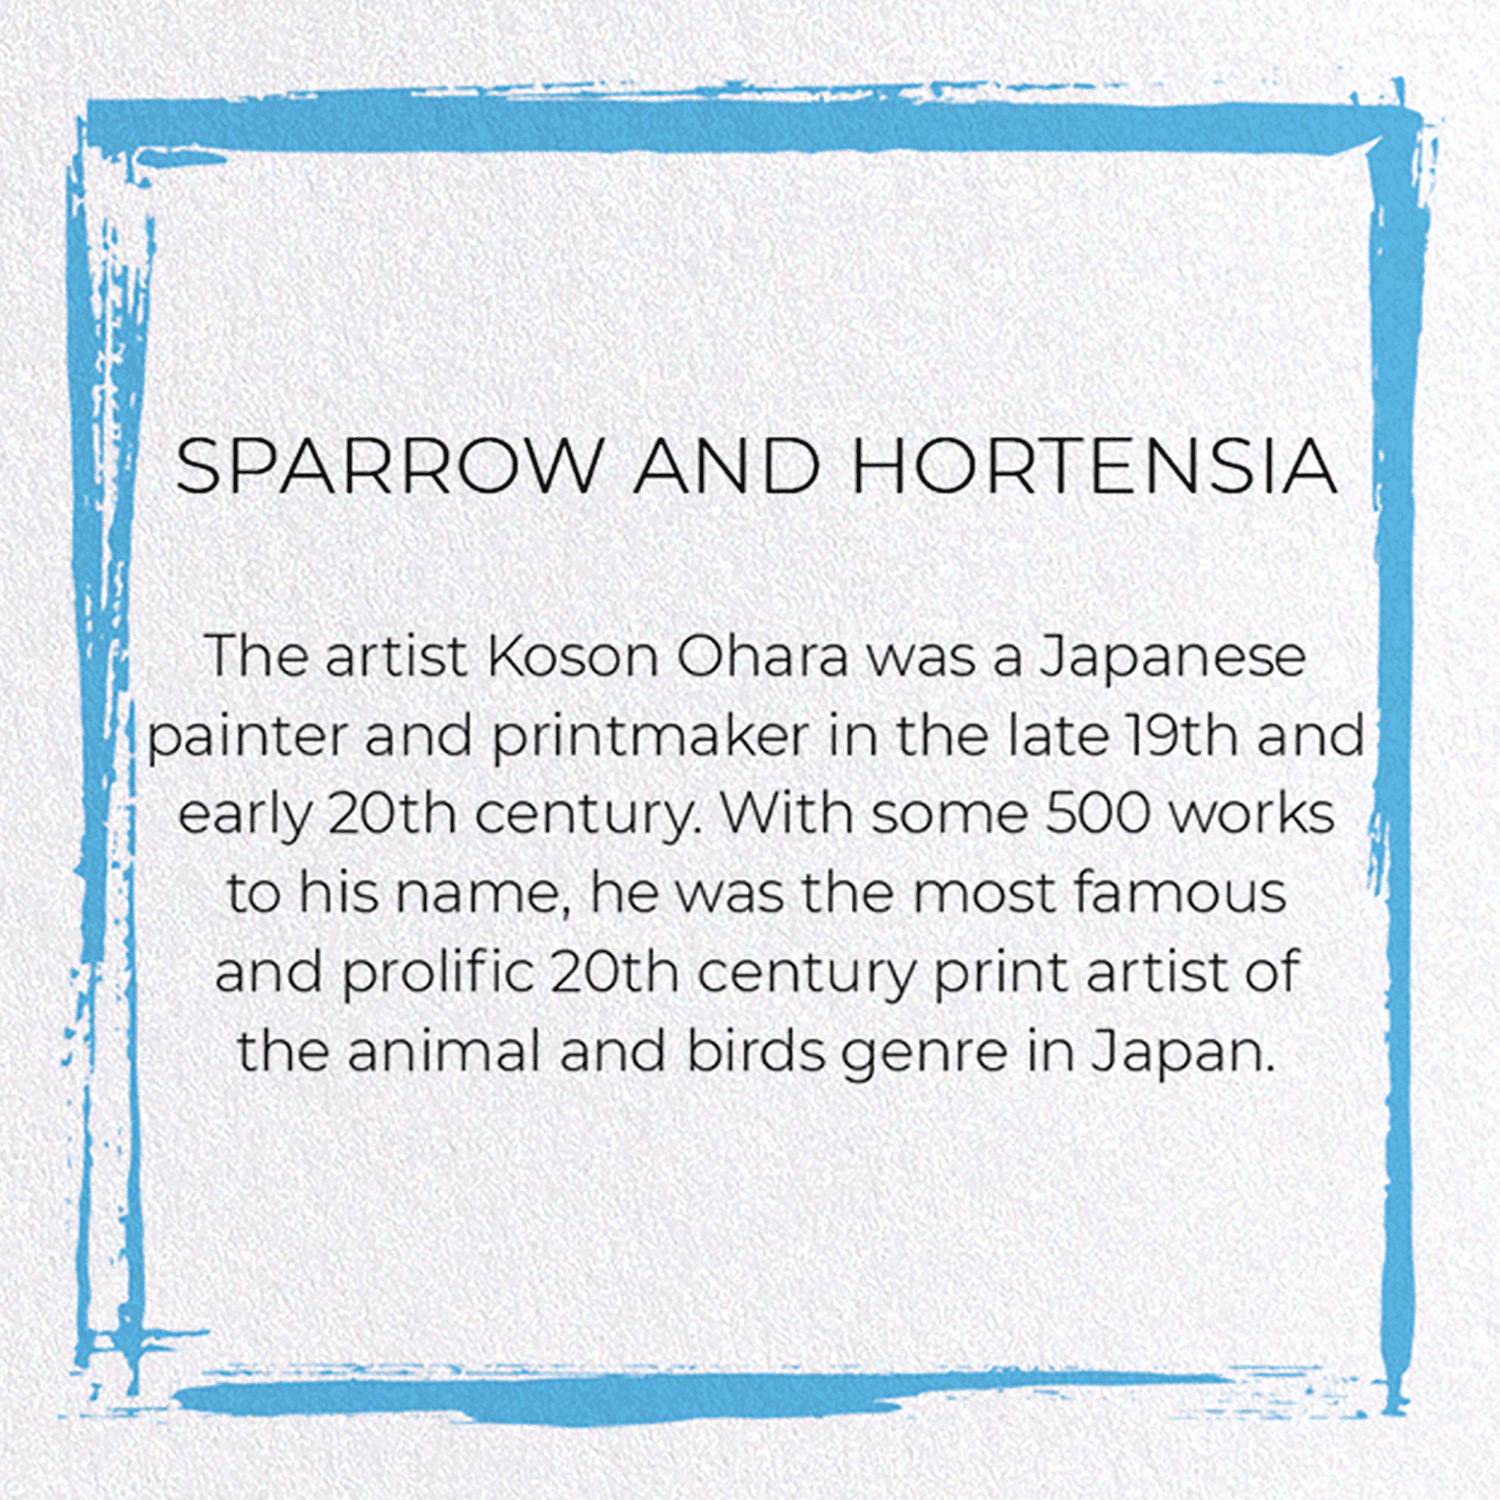 SPARROW AND HORTENSIA